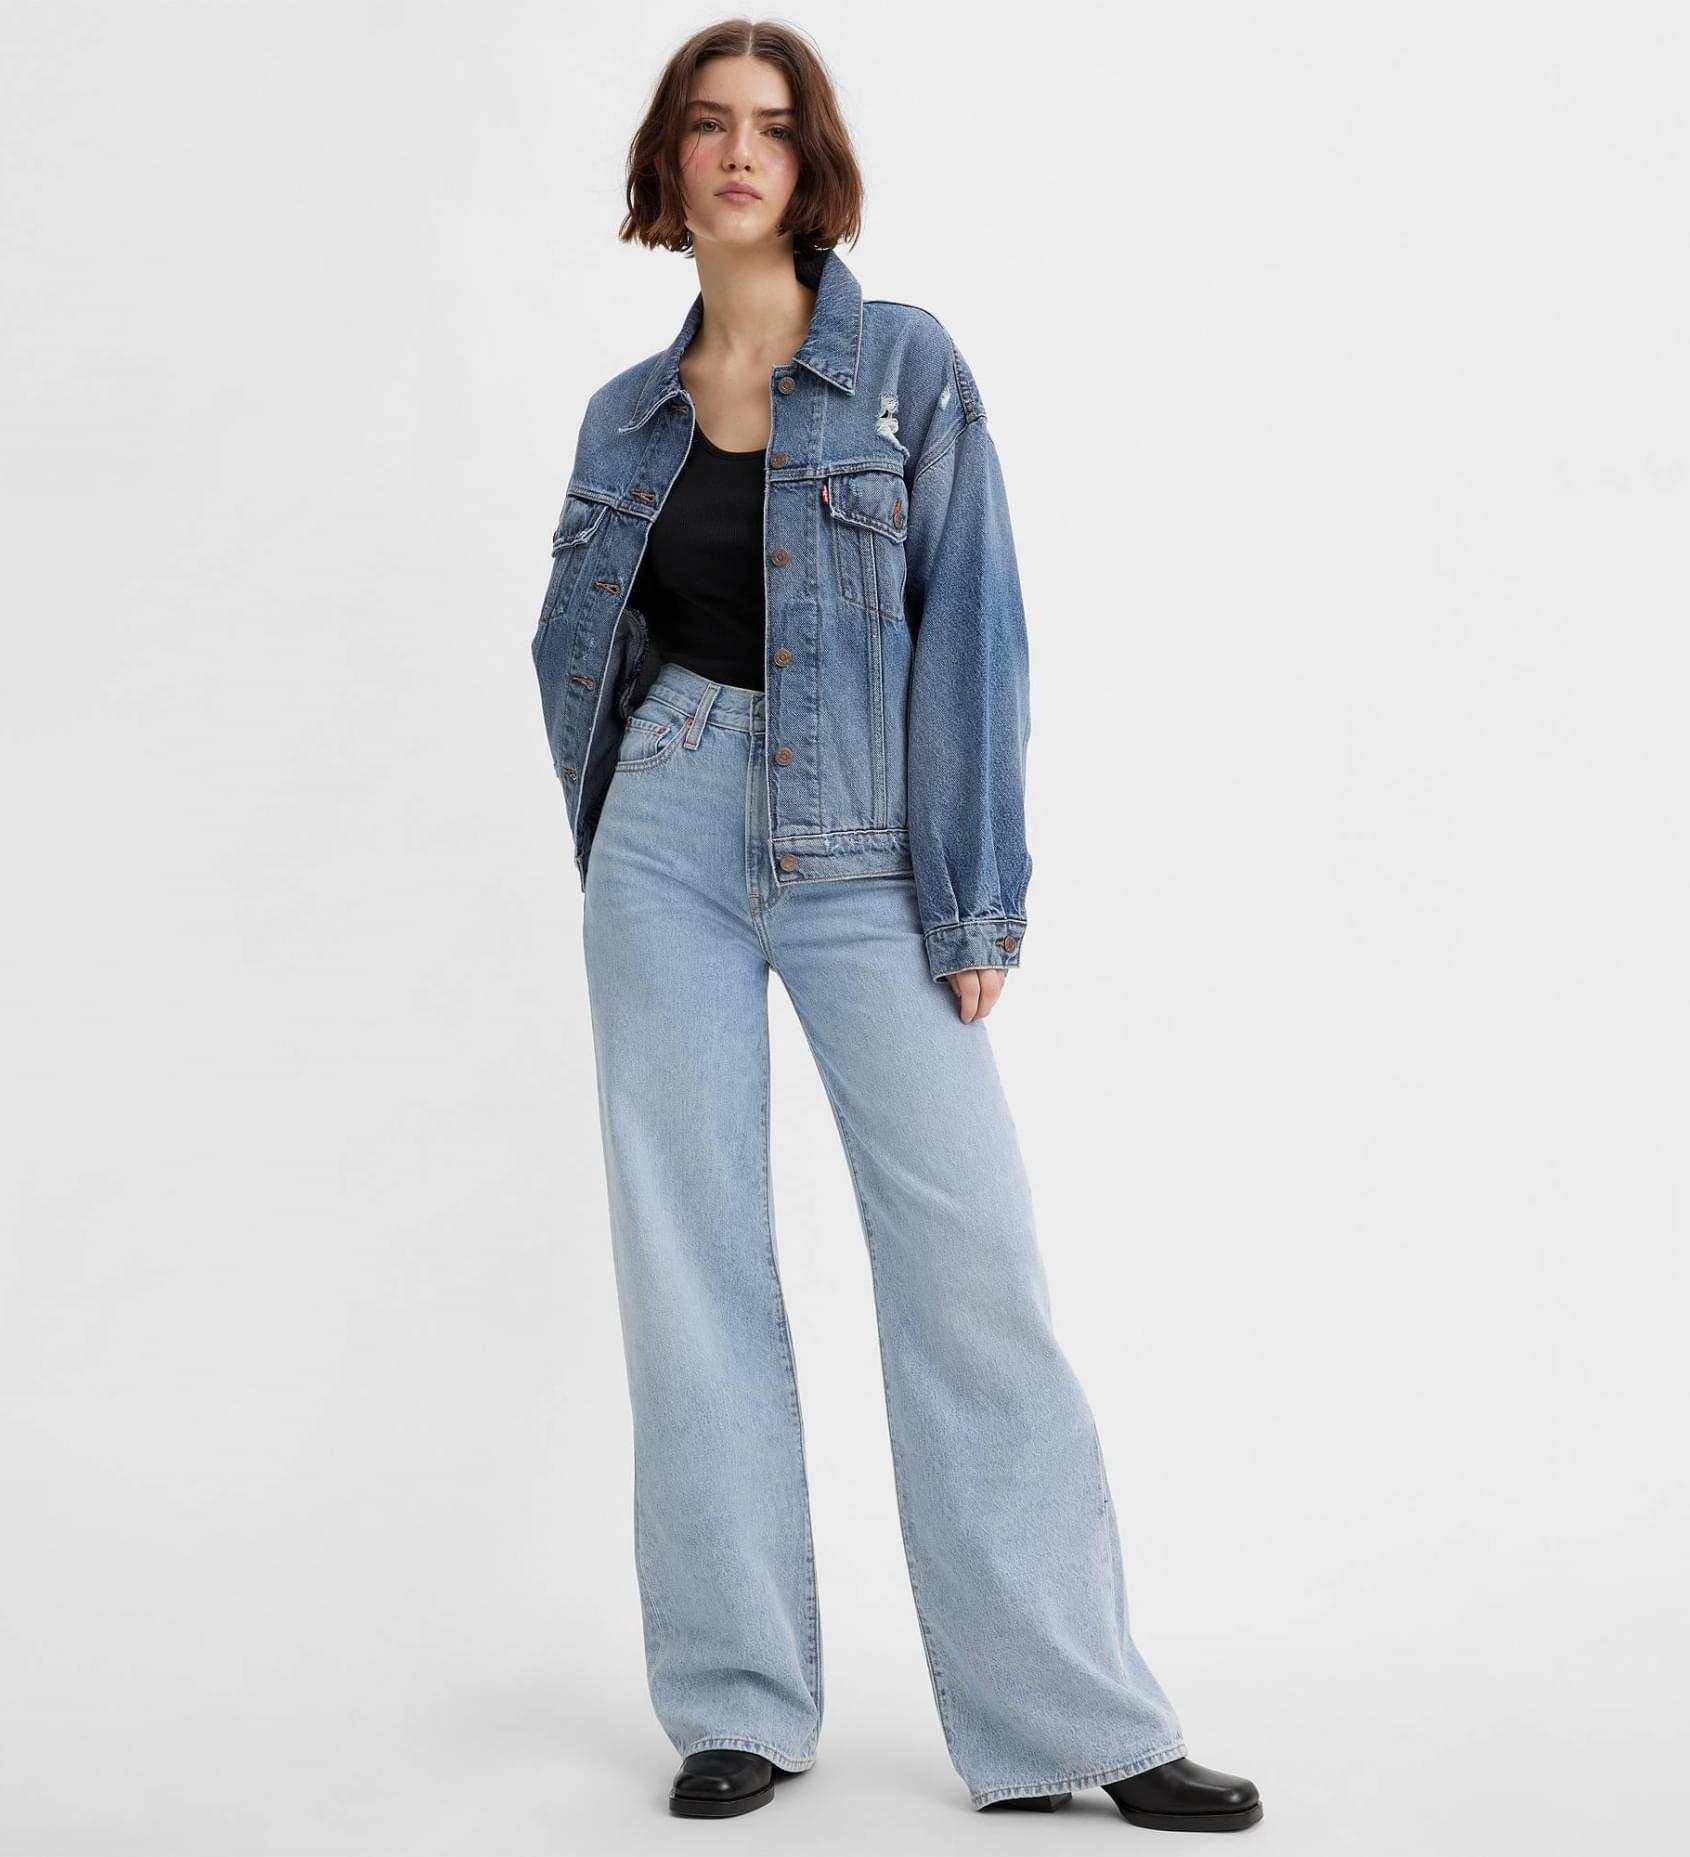 Stronger Obsession - Flared Jeans for Women